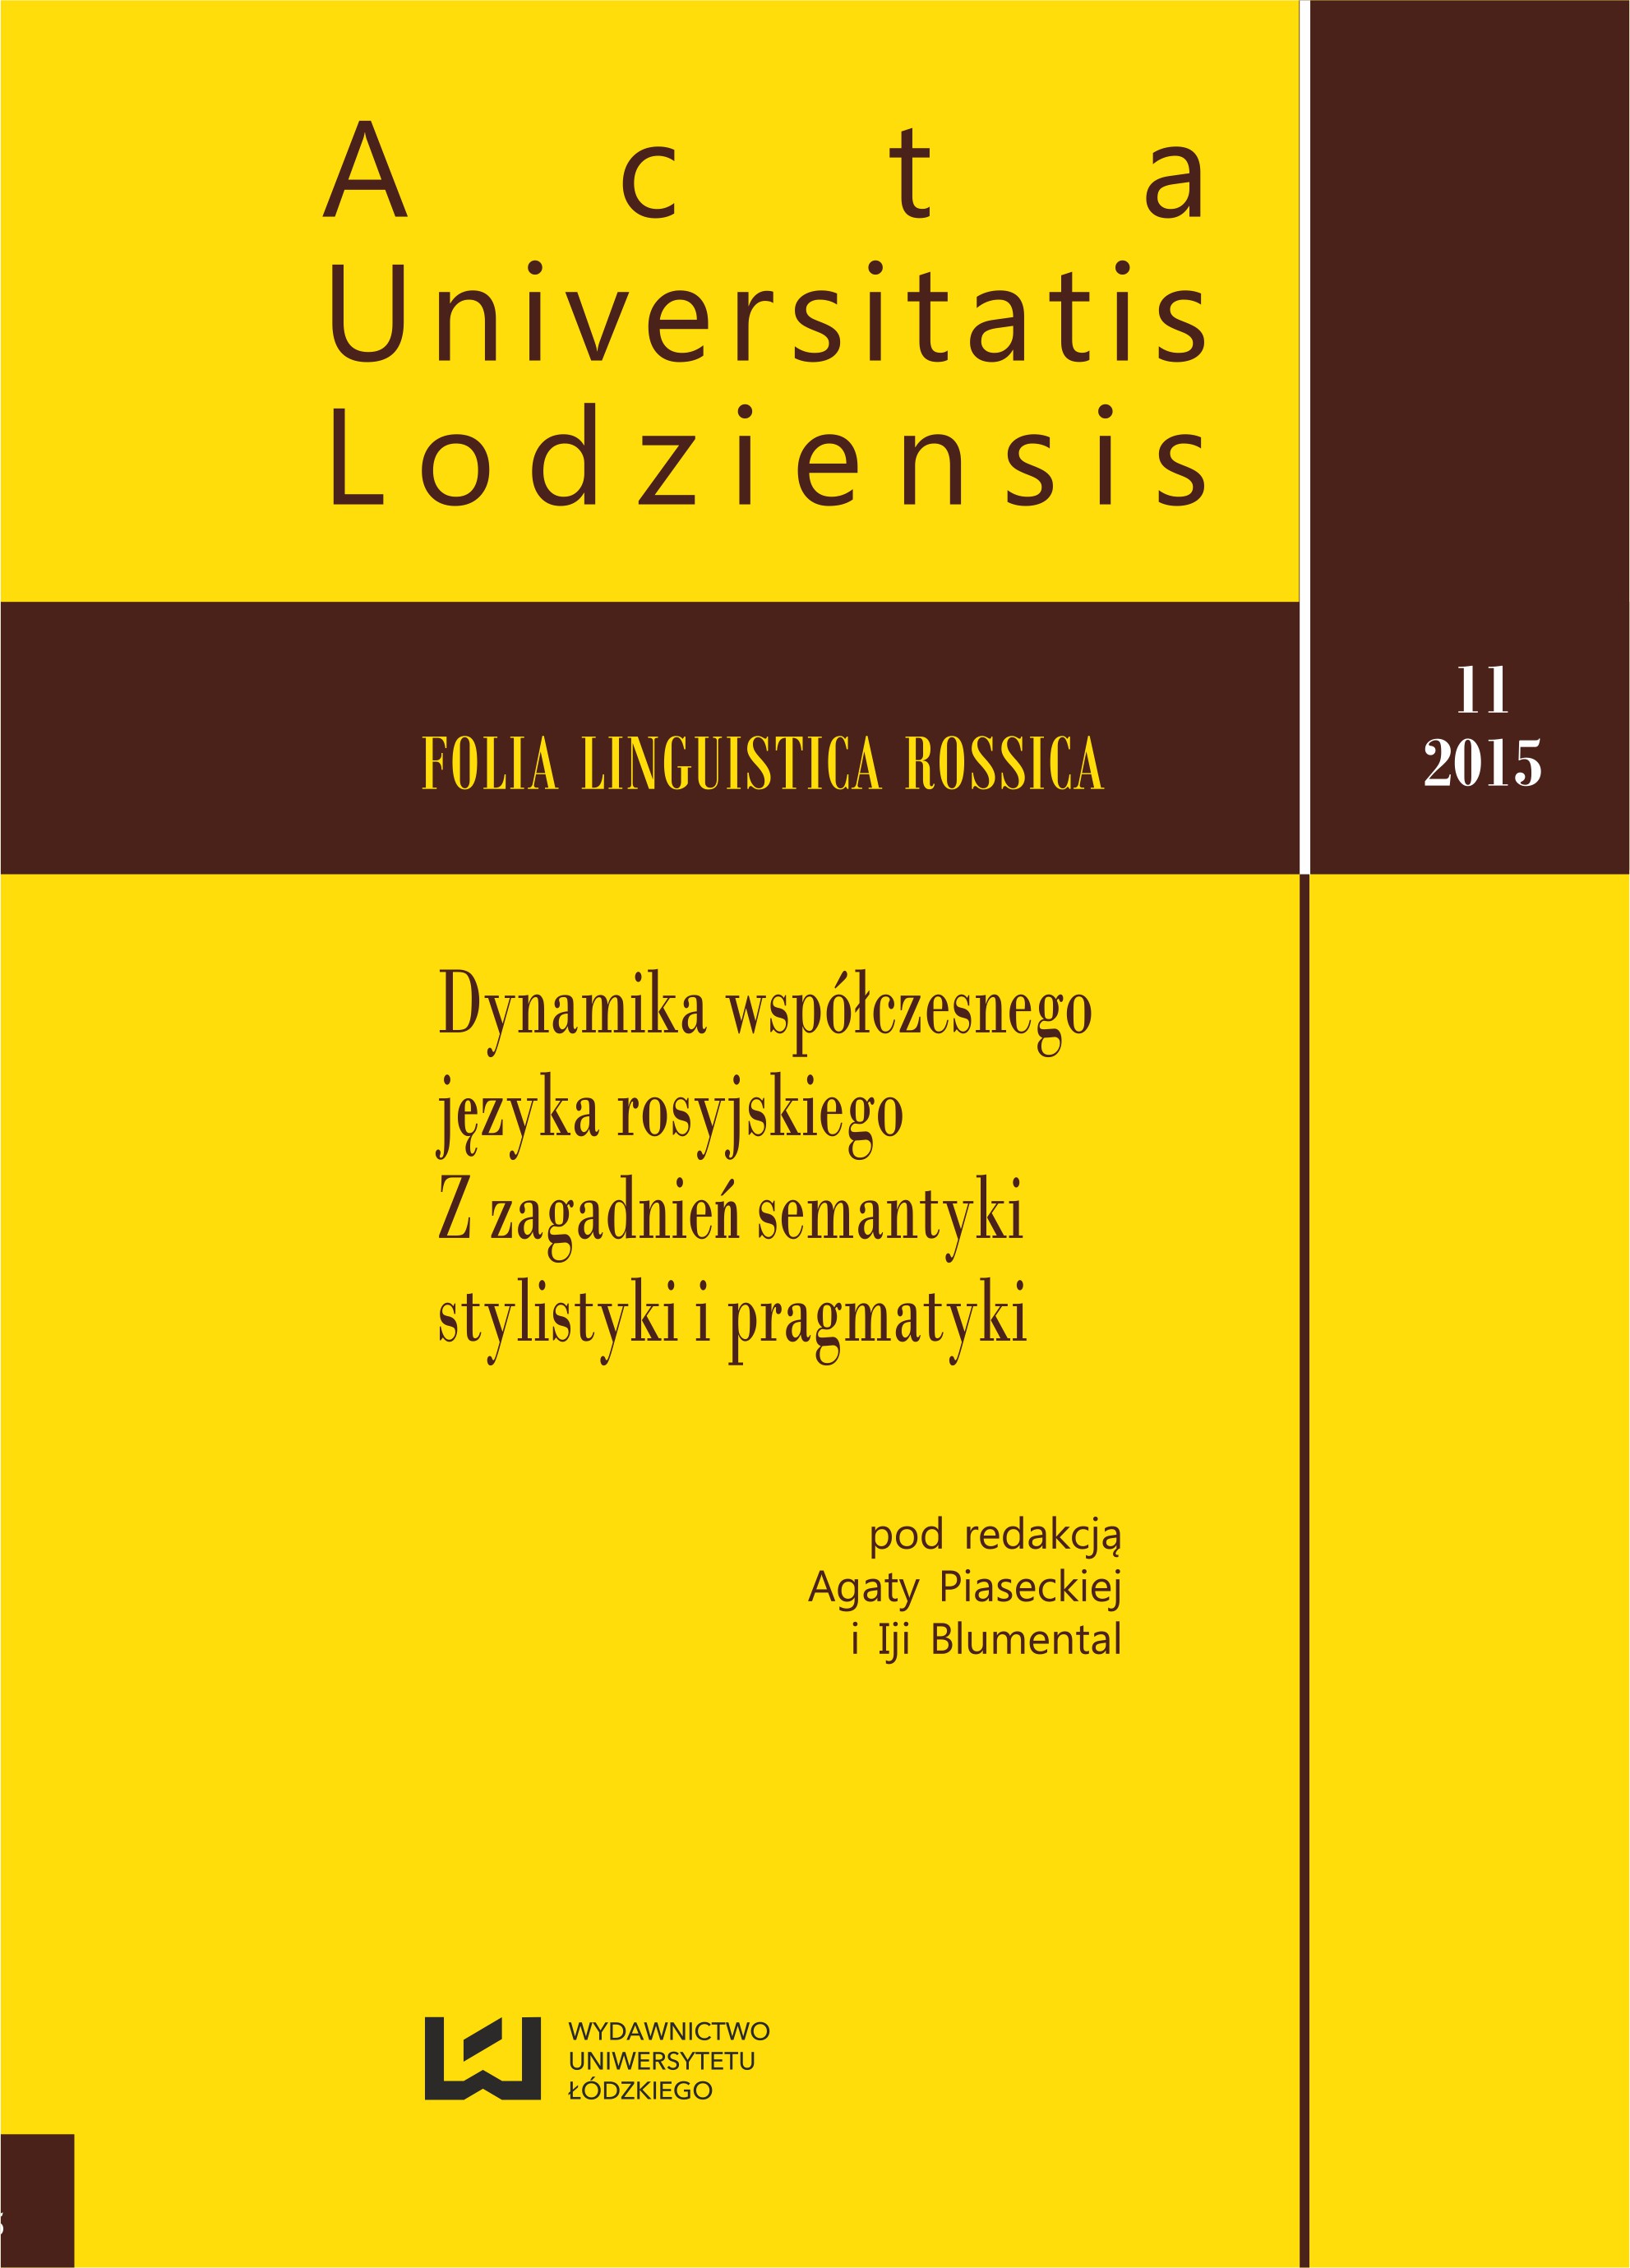 APPROVAL INTRODUCED IN THE NARRATIVE PART (ON THE EXAMPLE OF POLISH, RUSSIAN AND ENGLISH) Cover Image